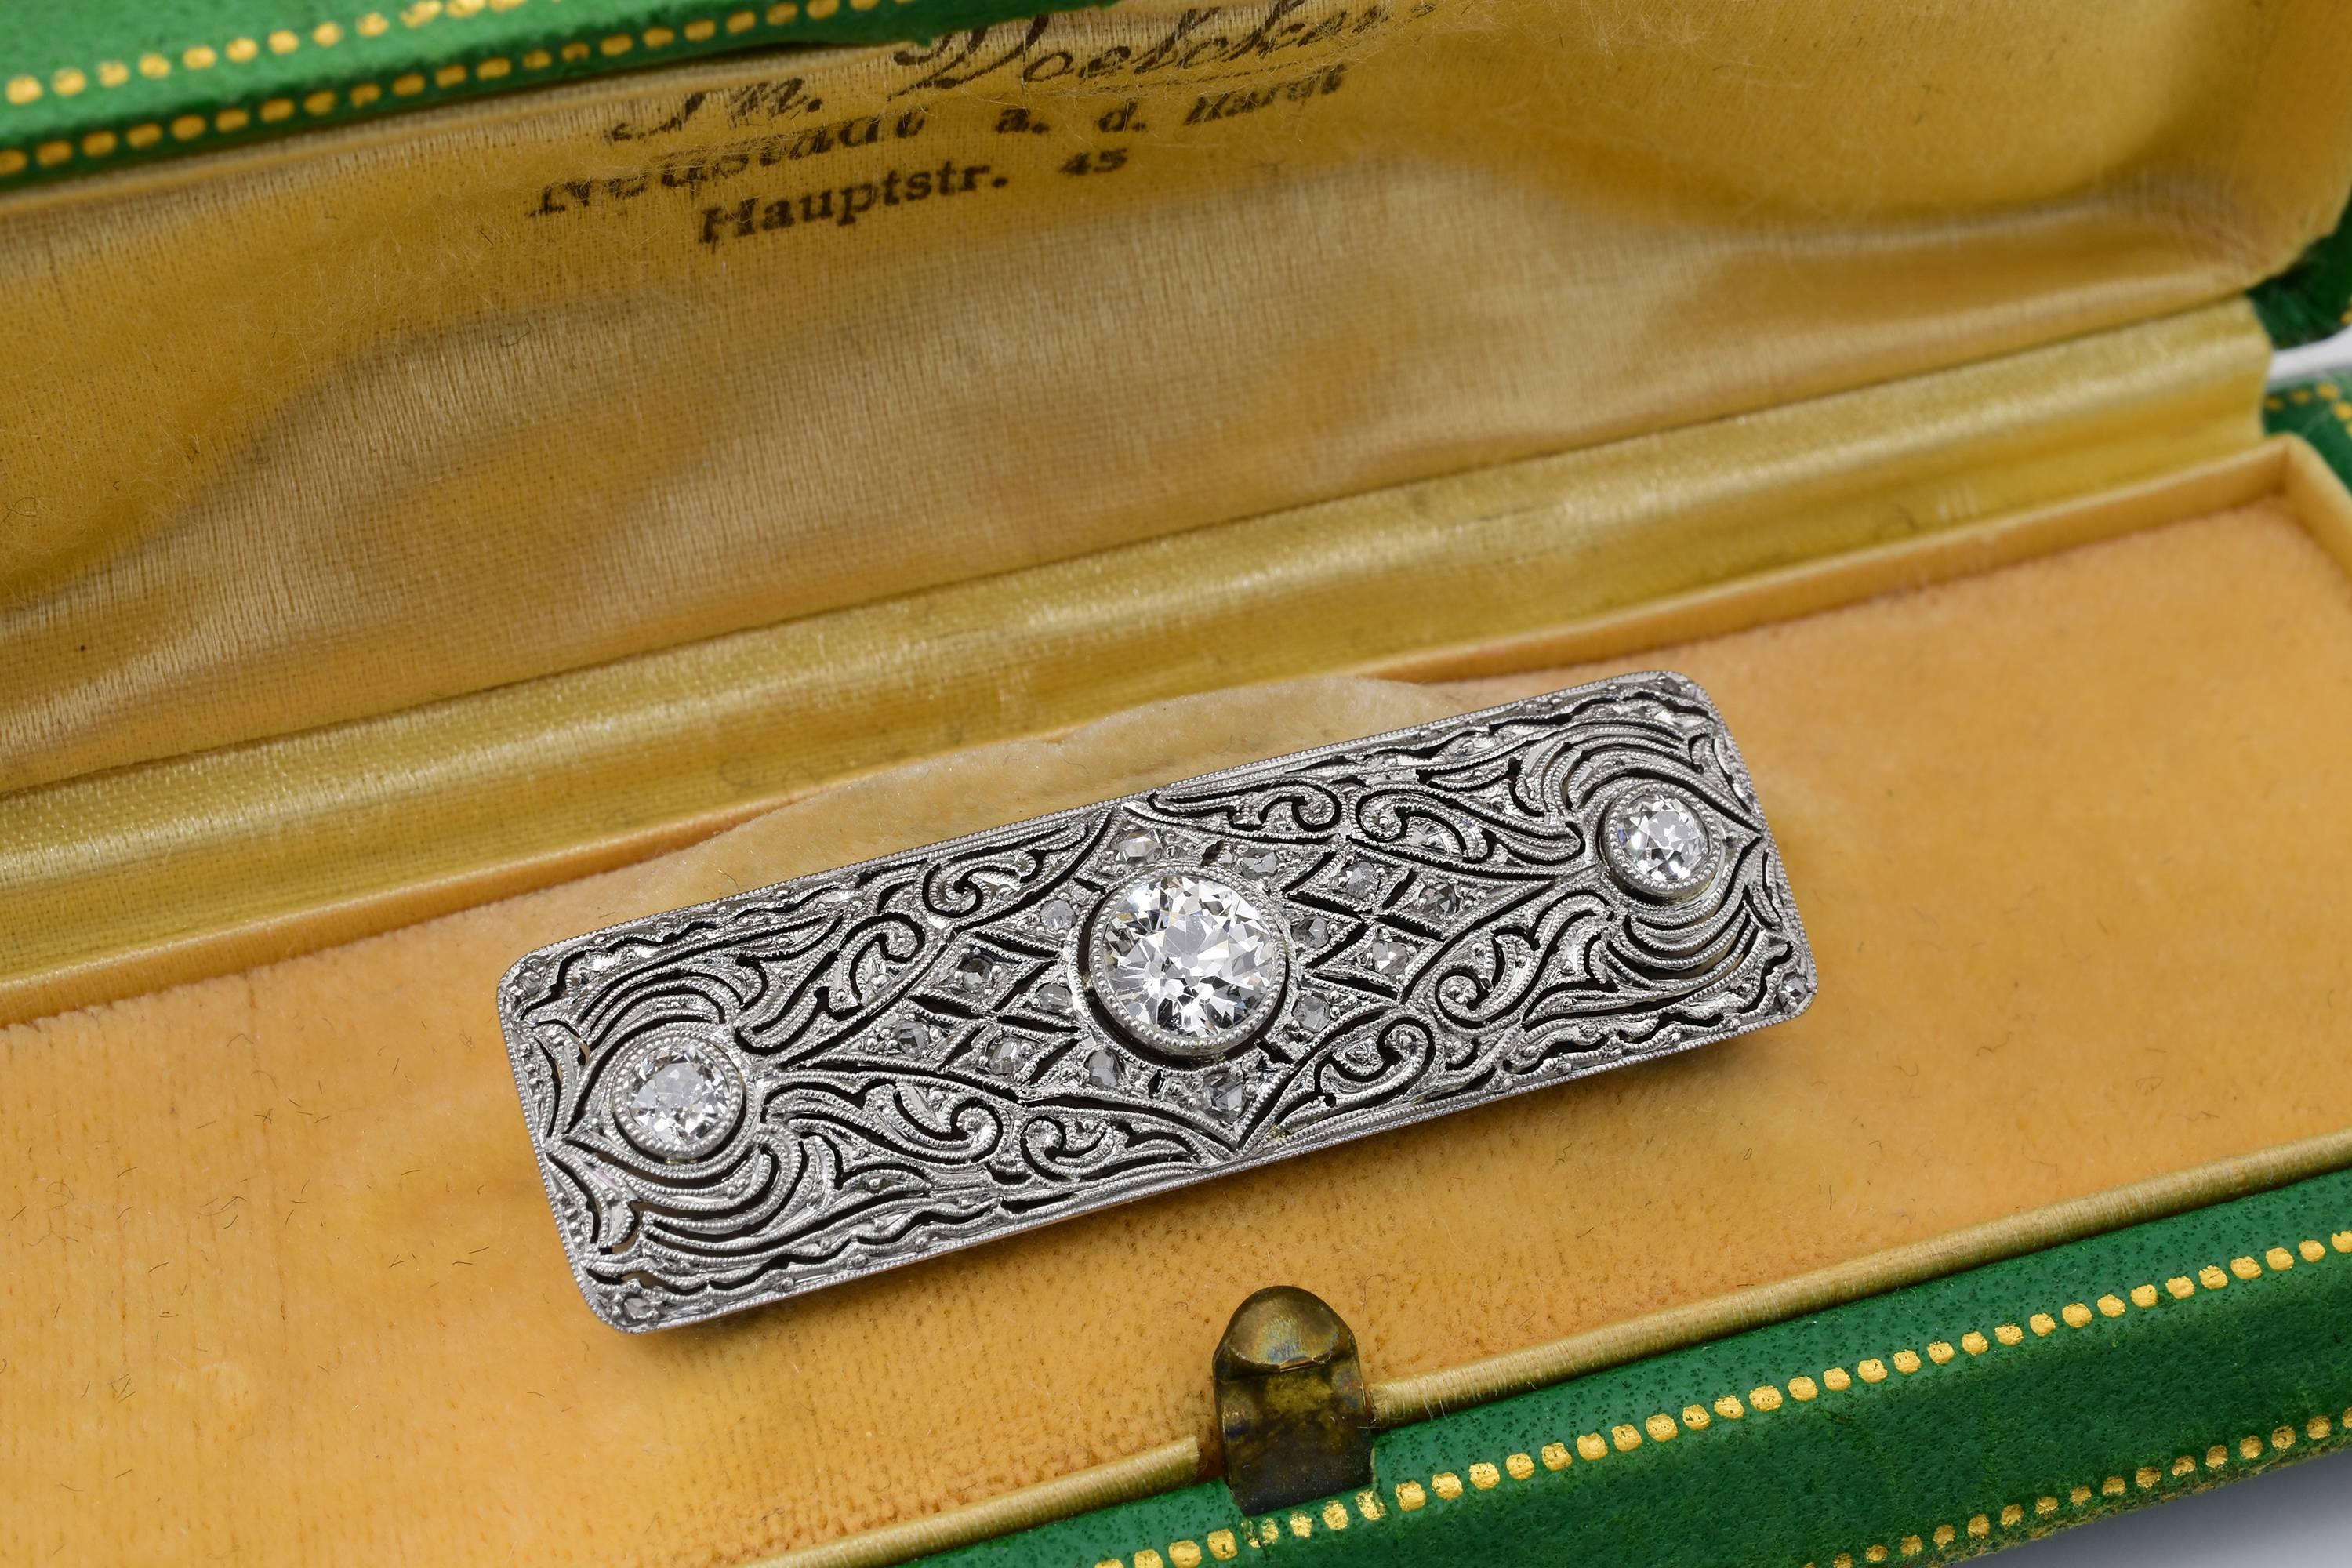 A 1930s deco era platinum brooch, featuring approximately 1.5 carats in diamonds. The brooch fastens flawlessly with a trombone push-pull clasp, common from the 1850s to 1940s. The brooch comes with the original box, which latches and closes and is